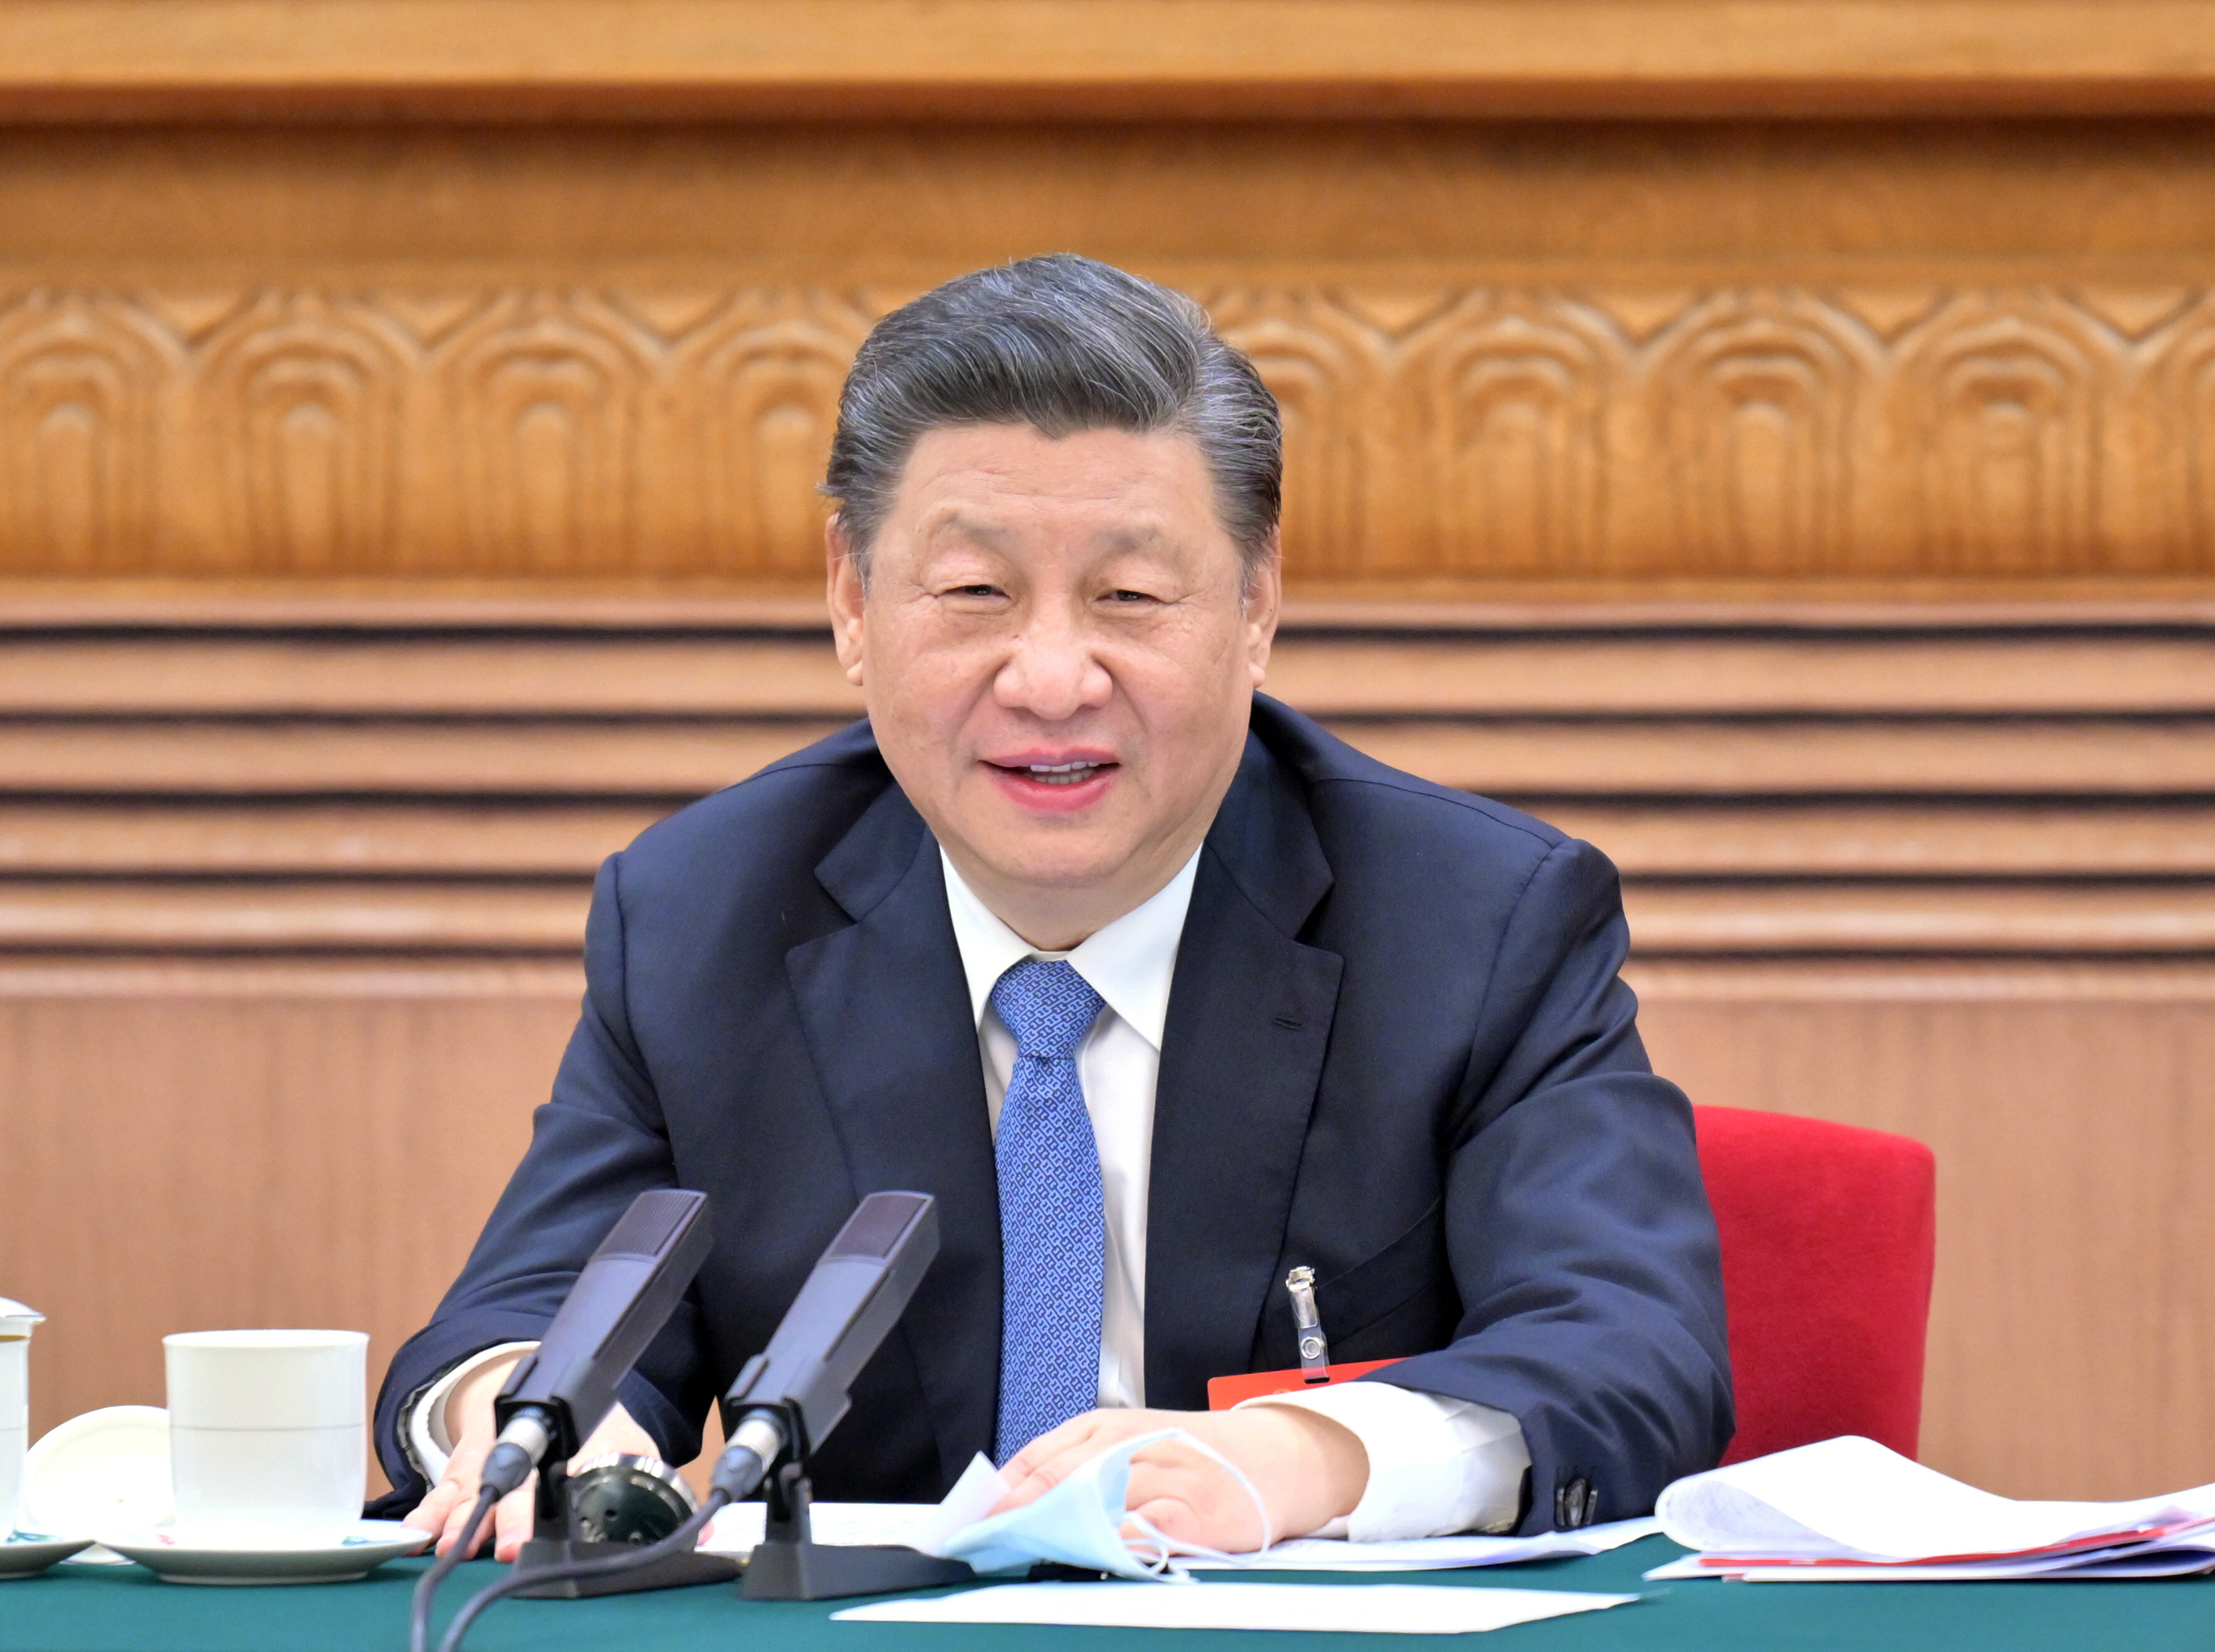 President Xi Jinping told Inner Mongolian deputies that unity is the “lifeline” for all ethnic groups in China. Photo: Xinhua